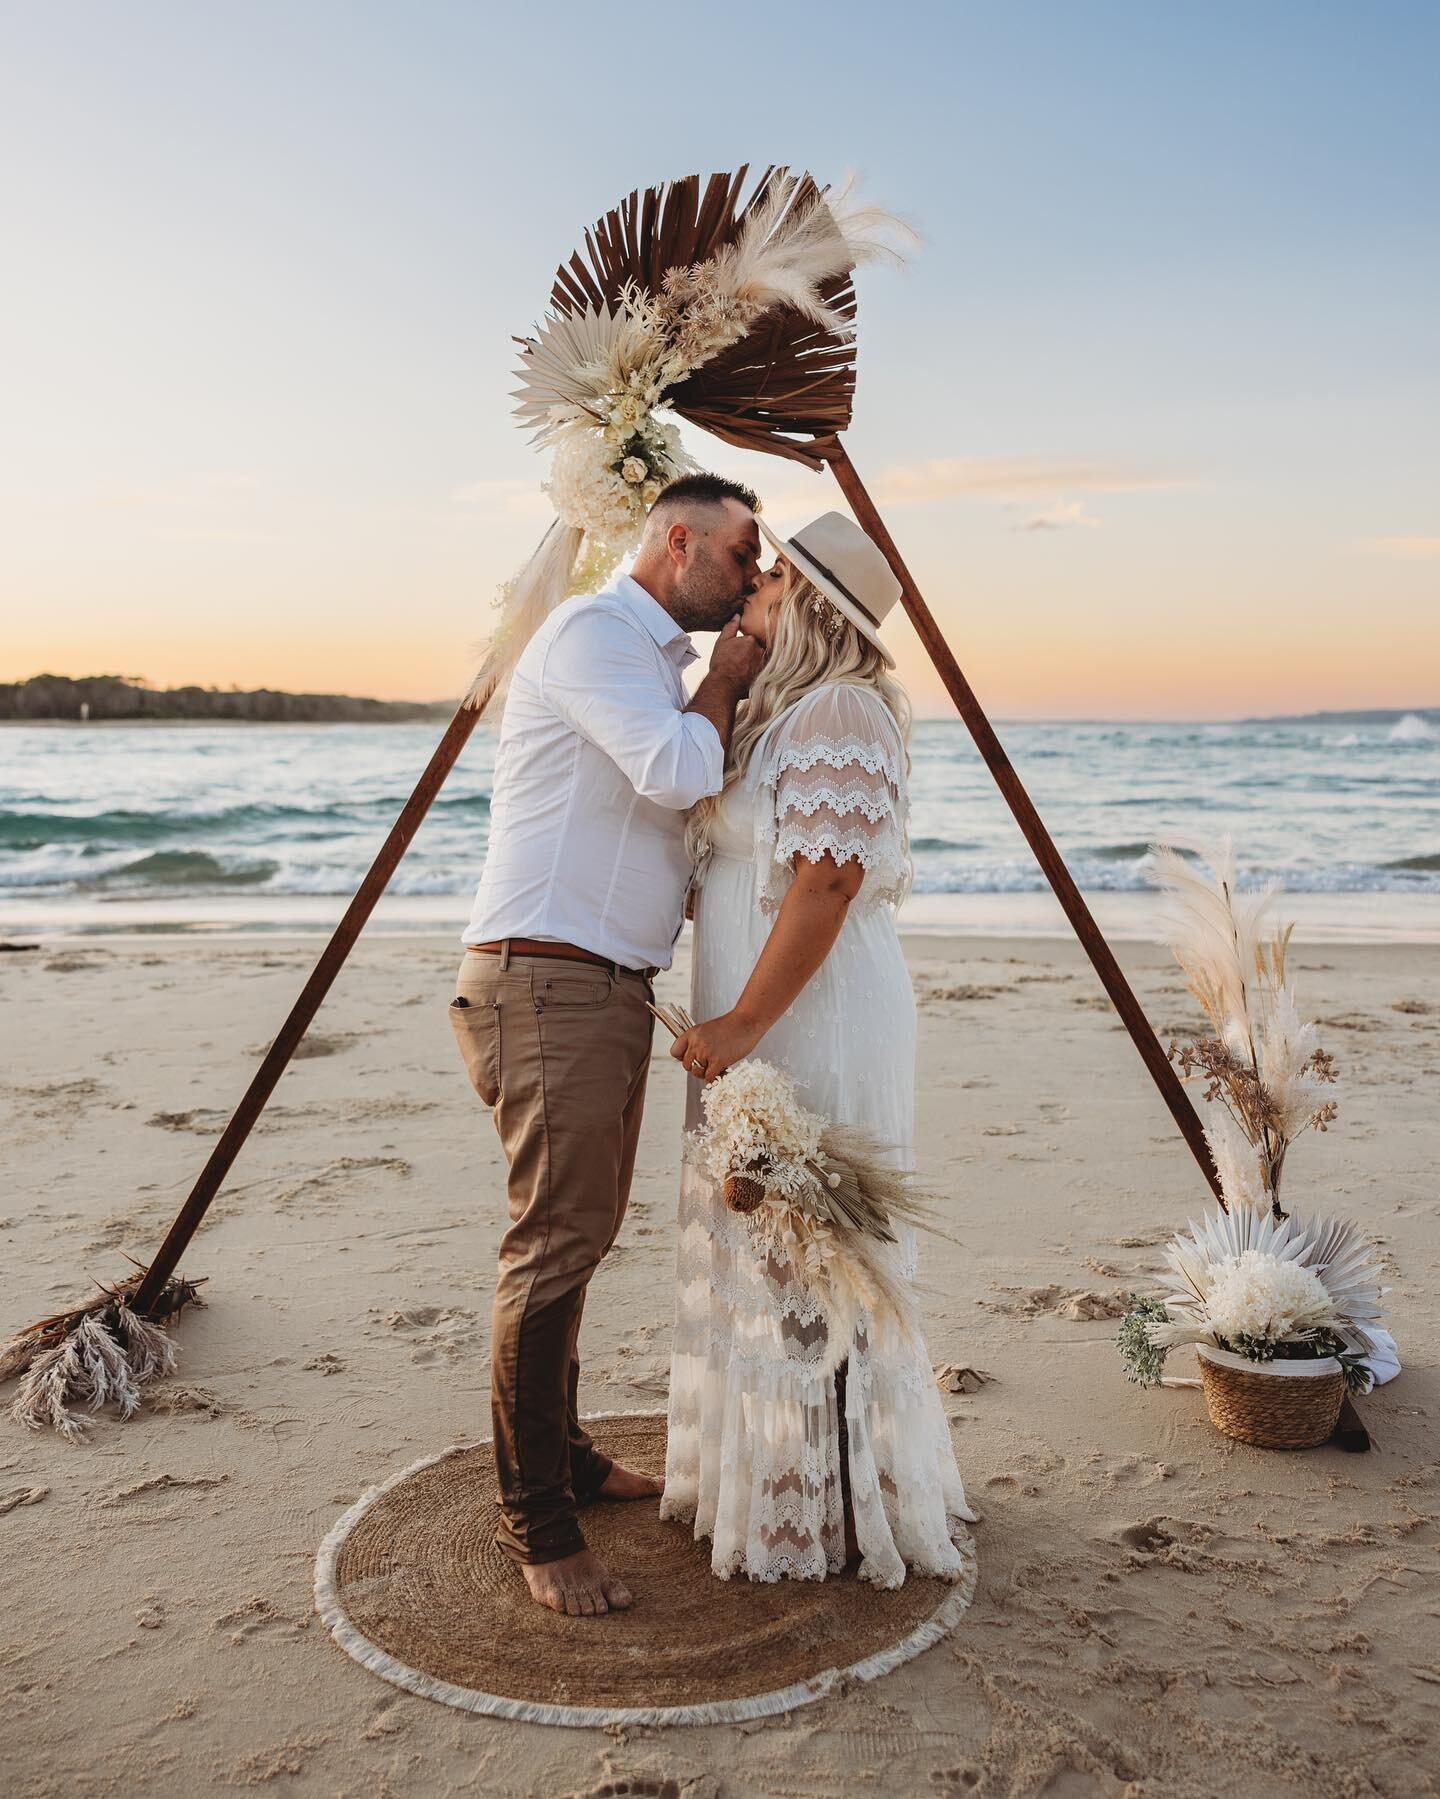 Congratulations to Taisha + James eloping at the Noosa River Entrance followed by a golden hour photoshoot 🌹
Styling &amp; Coordination by us 🤍
Photographer @leahcohenphotography 
Celebrant @noosaheadscelebrant 
Hair and makeup @beauty.on.the.move 